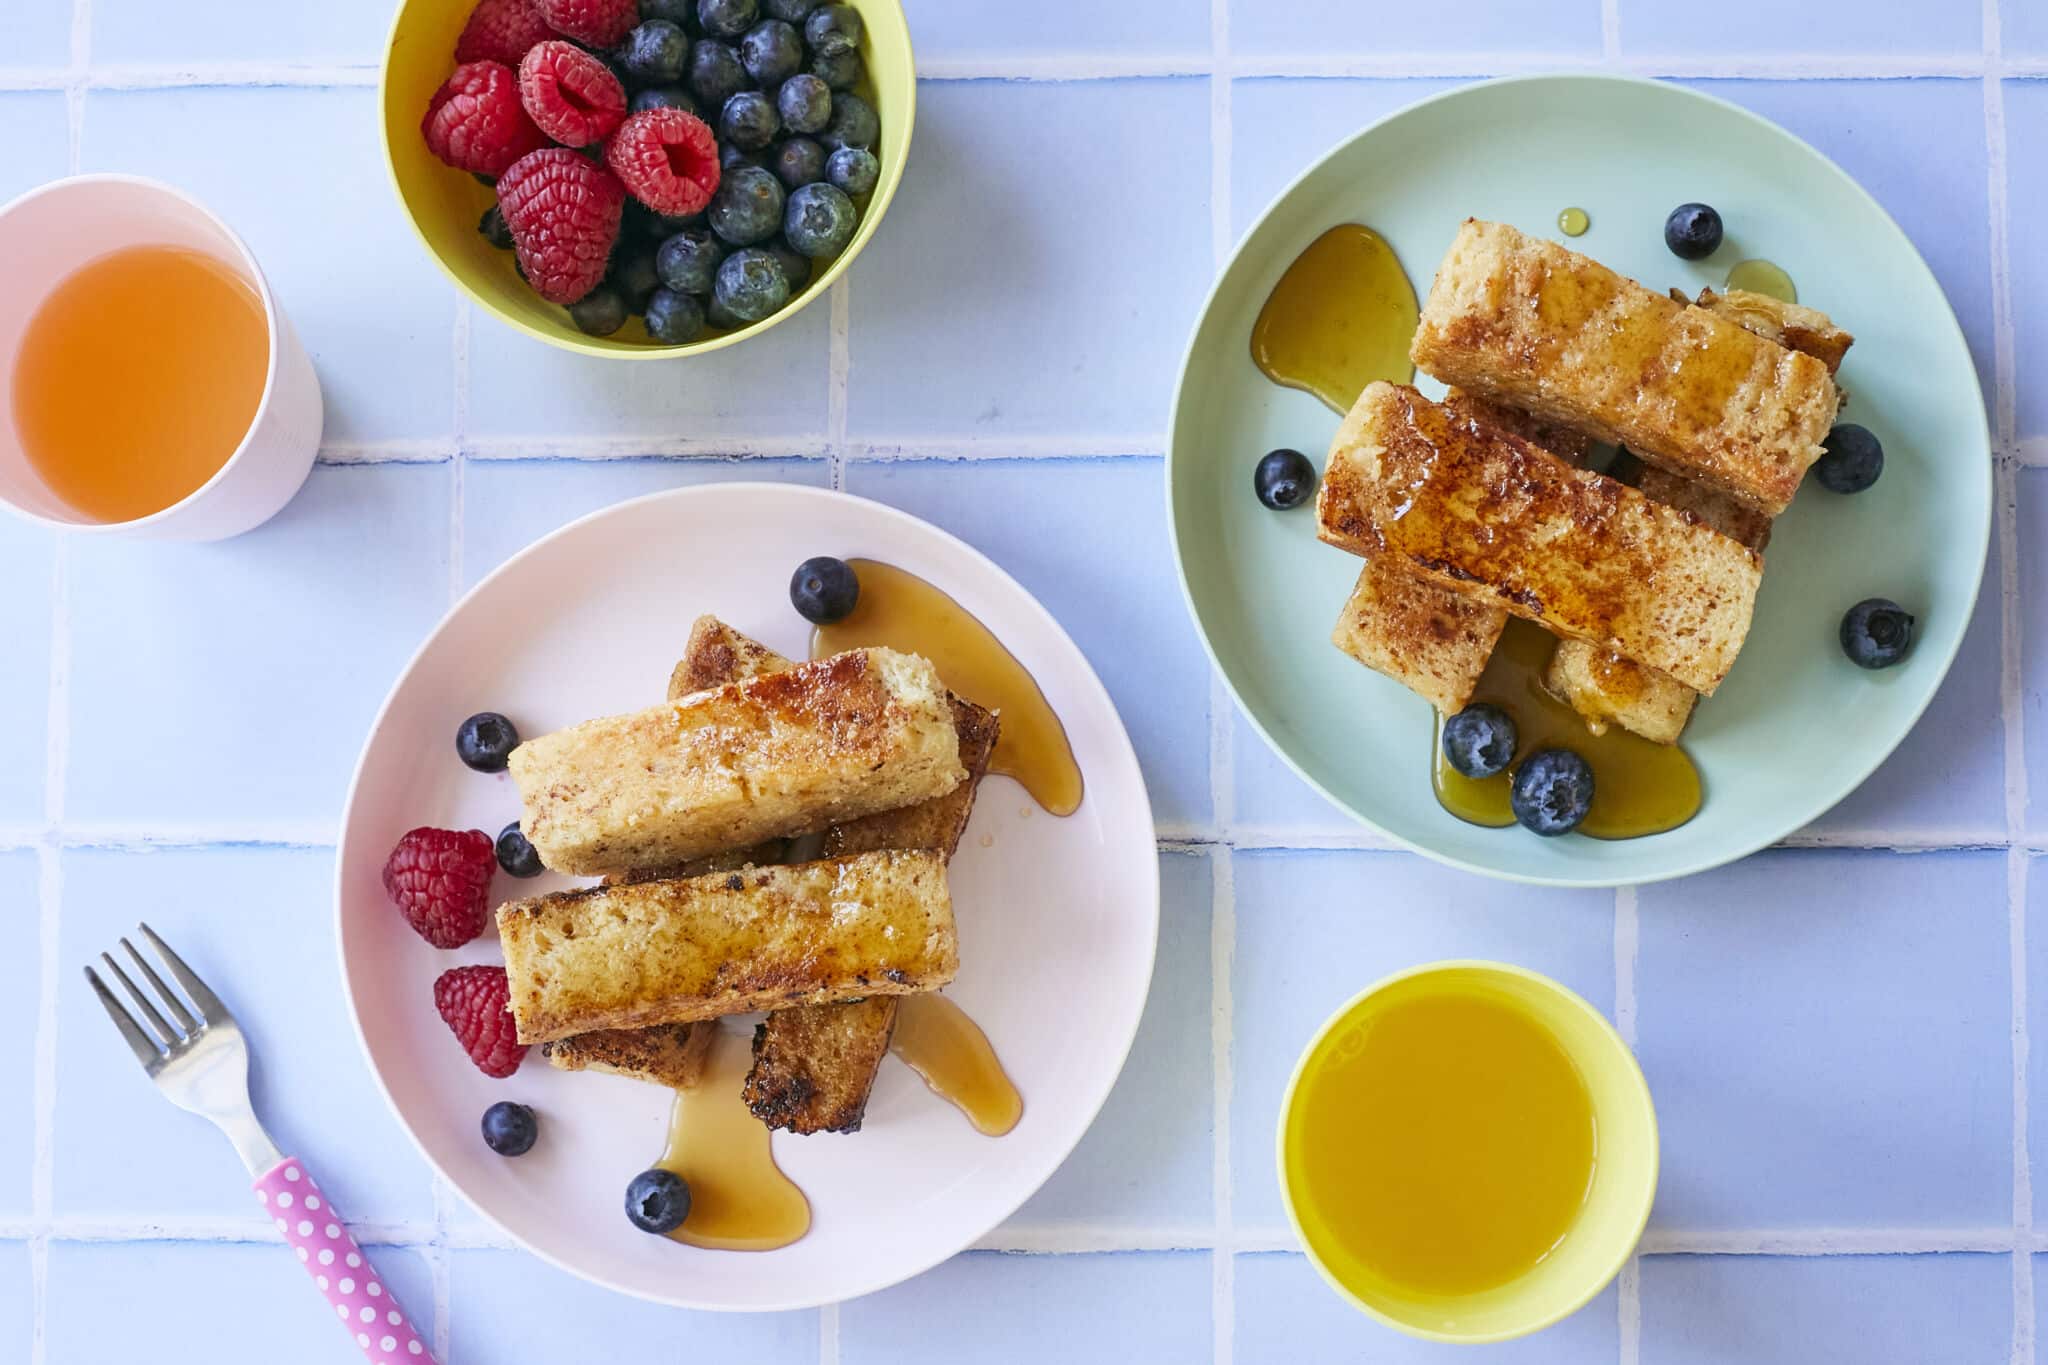 Golden brown French toast sticks paired with Fresh raspberries and blueberries, with syrup on the side.